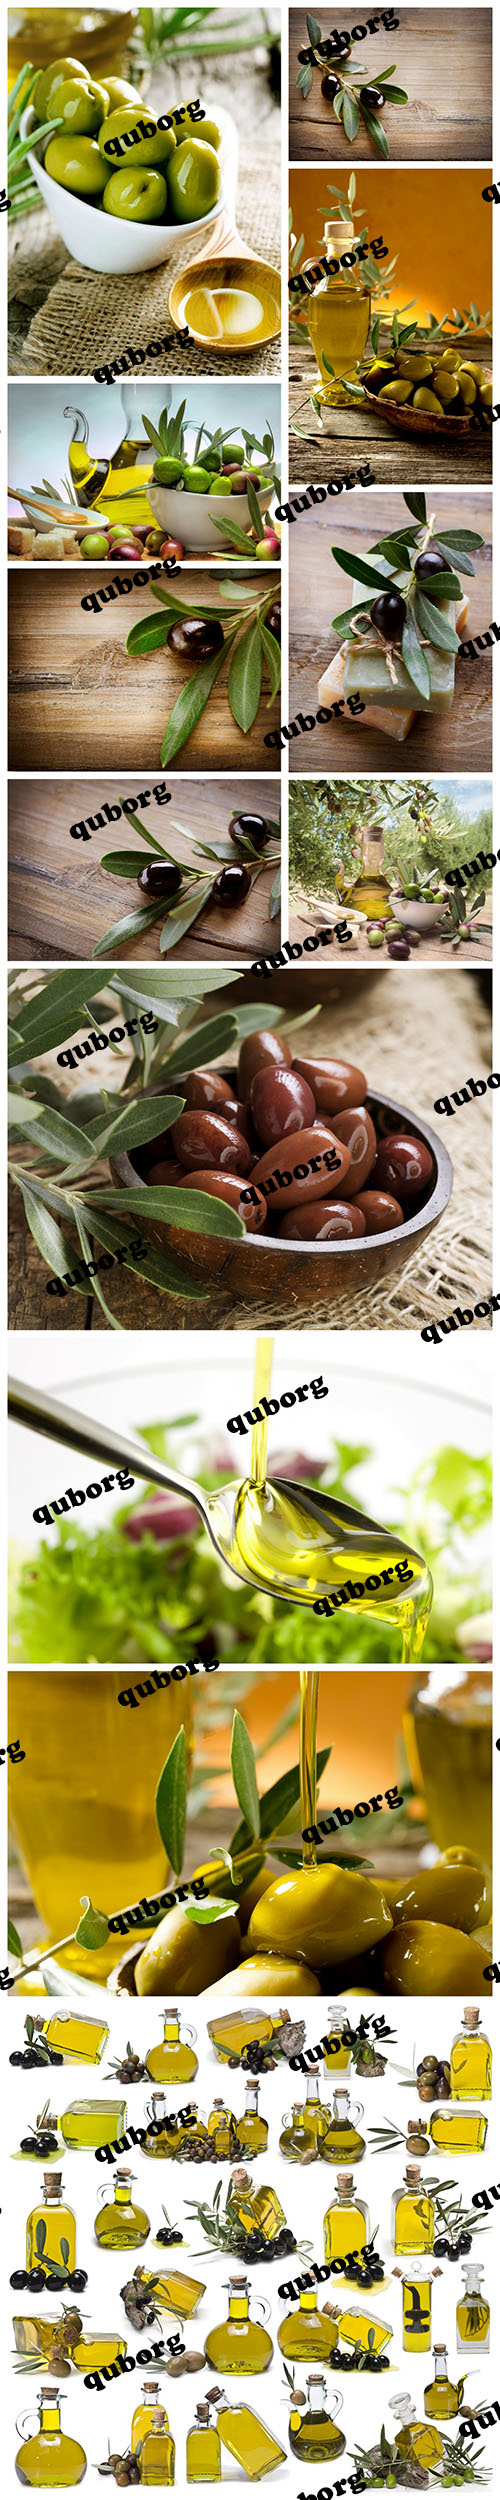 Stock Photos - Olives & Olive Oil